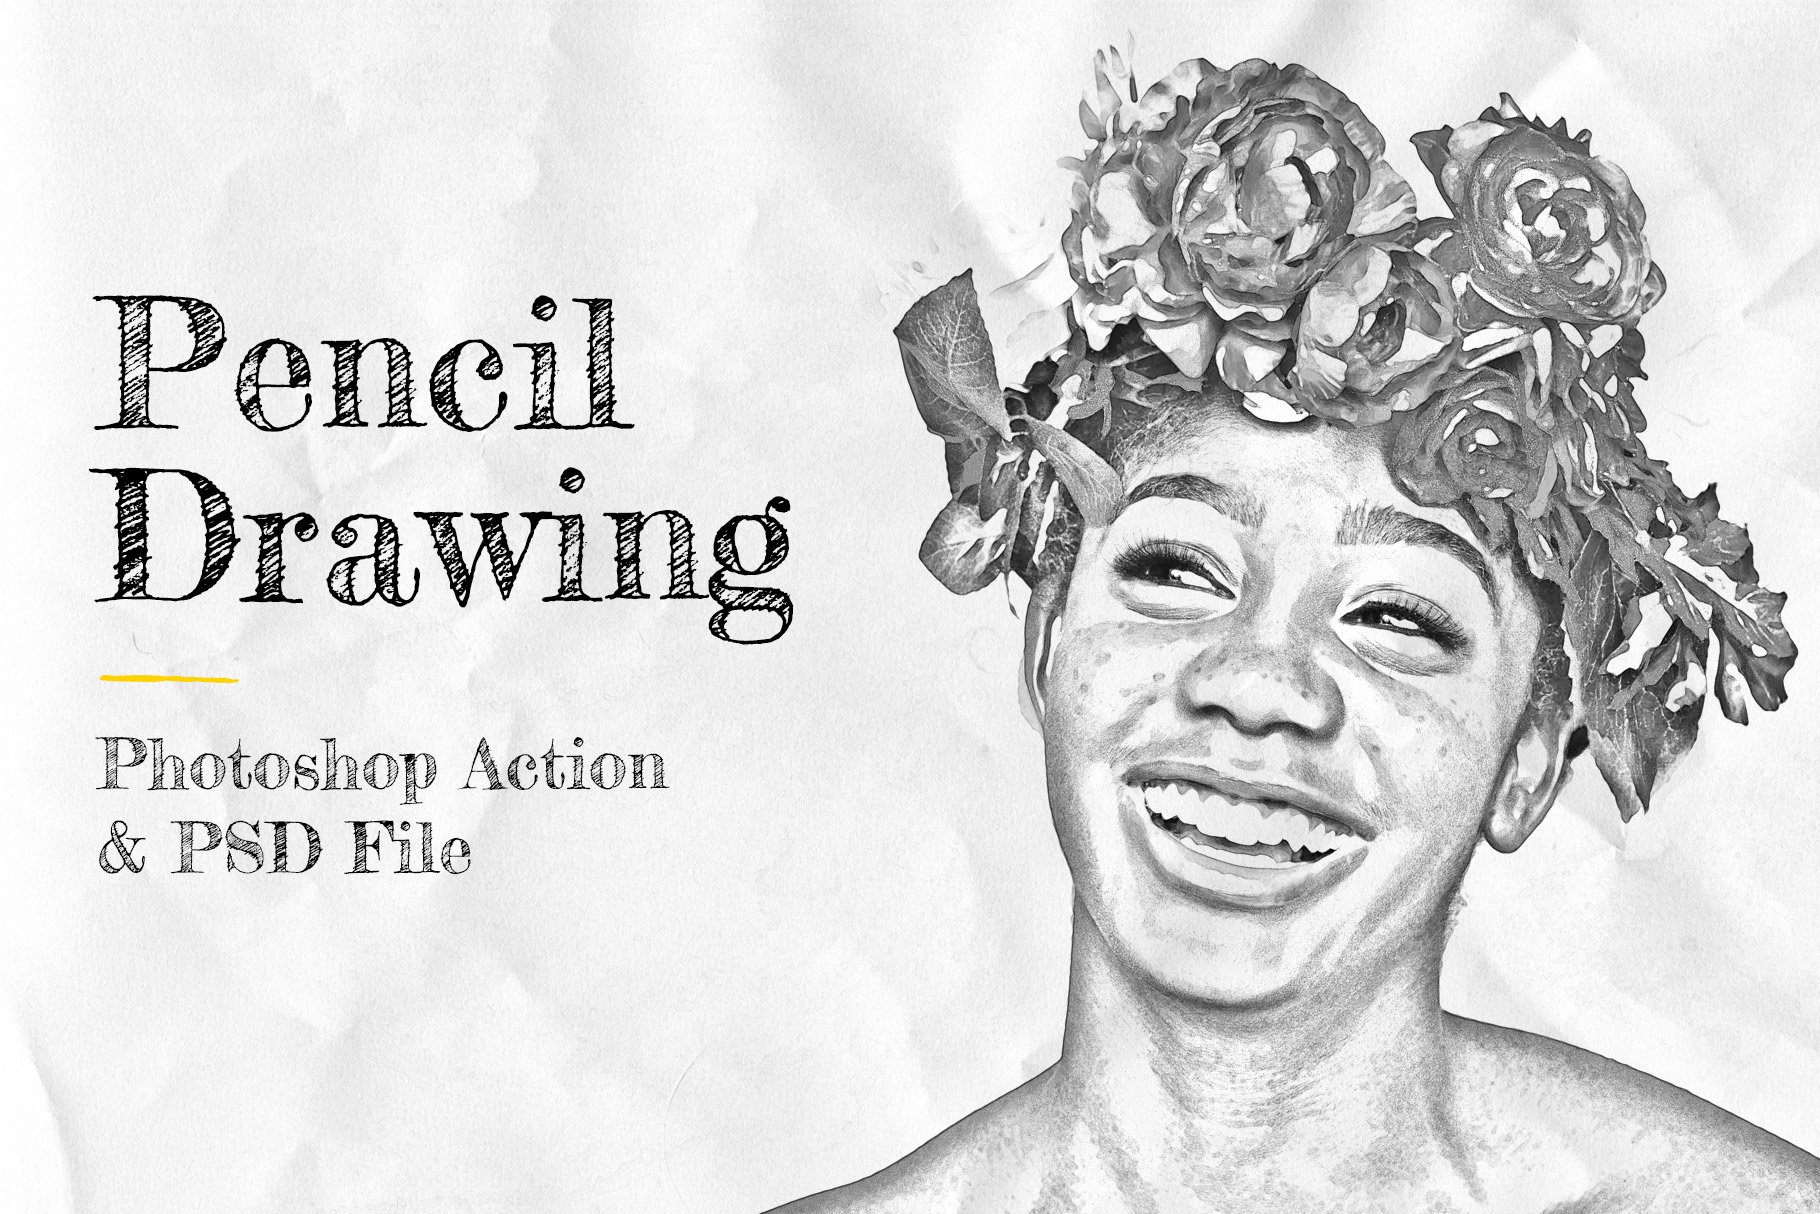 Pencil Drawing Photoshop Actioncover image.